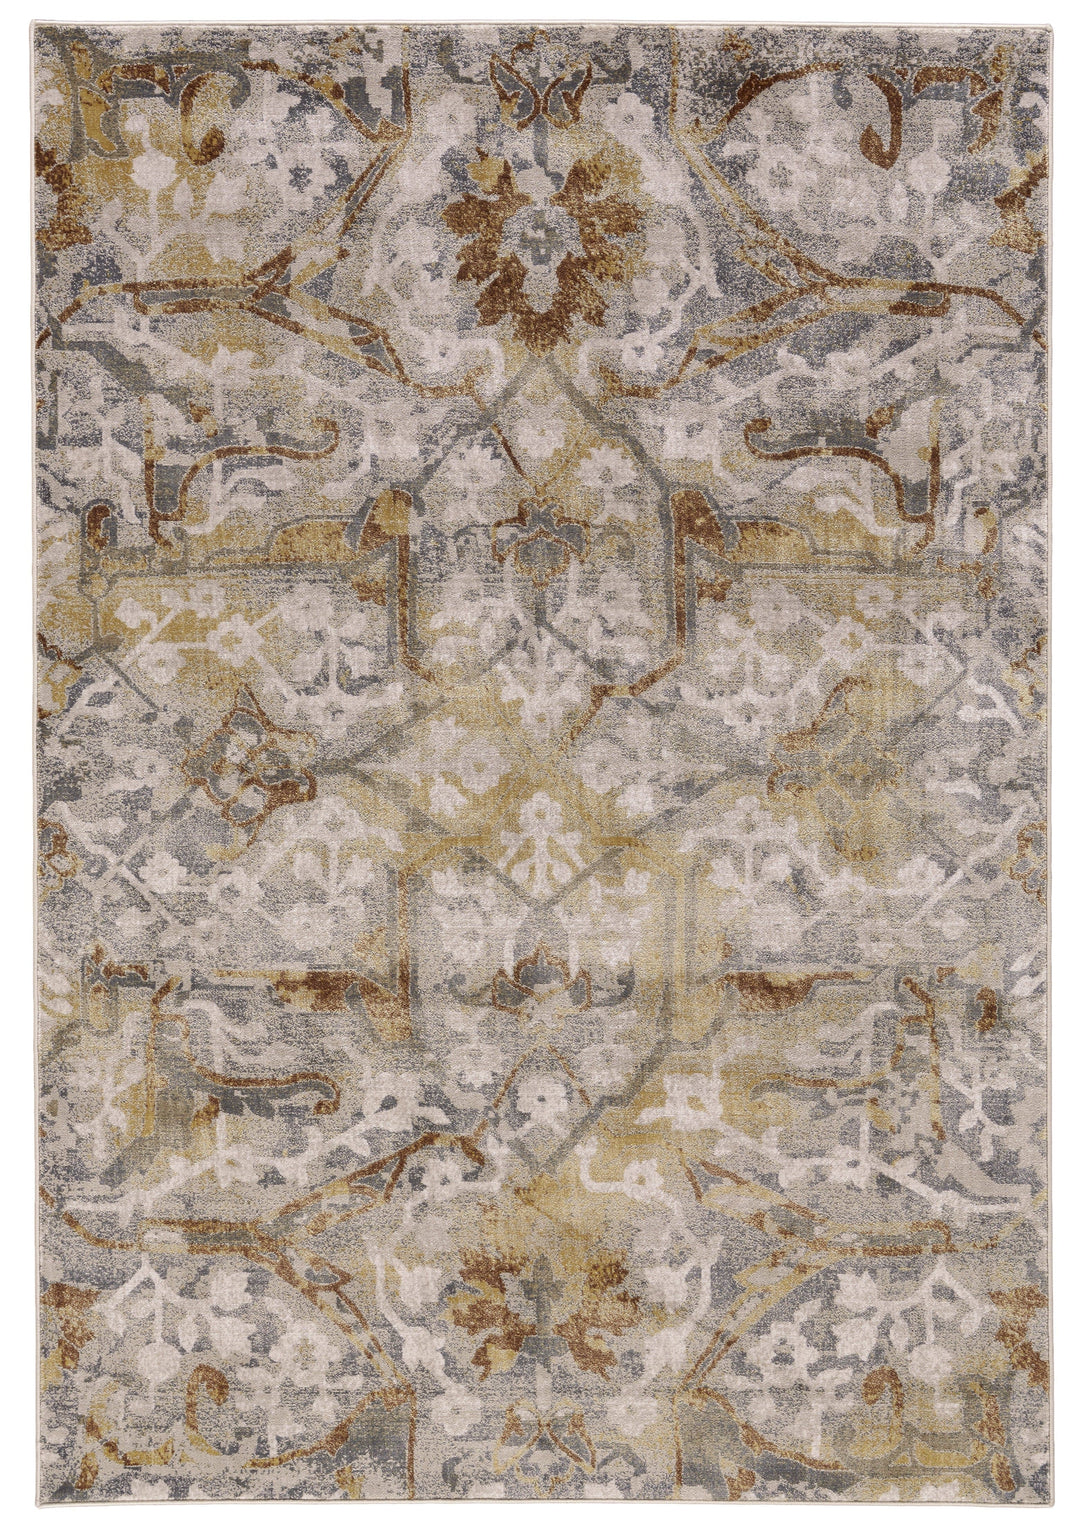 Feizy Feizy Cannes Lustrous Abstract Rug - Available in 6 Sizes - Pewter Gray & Honey Gold 5' x 8' 6723685FGRYYELE10